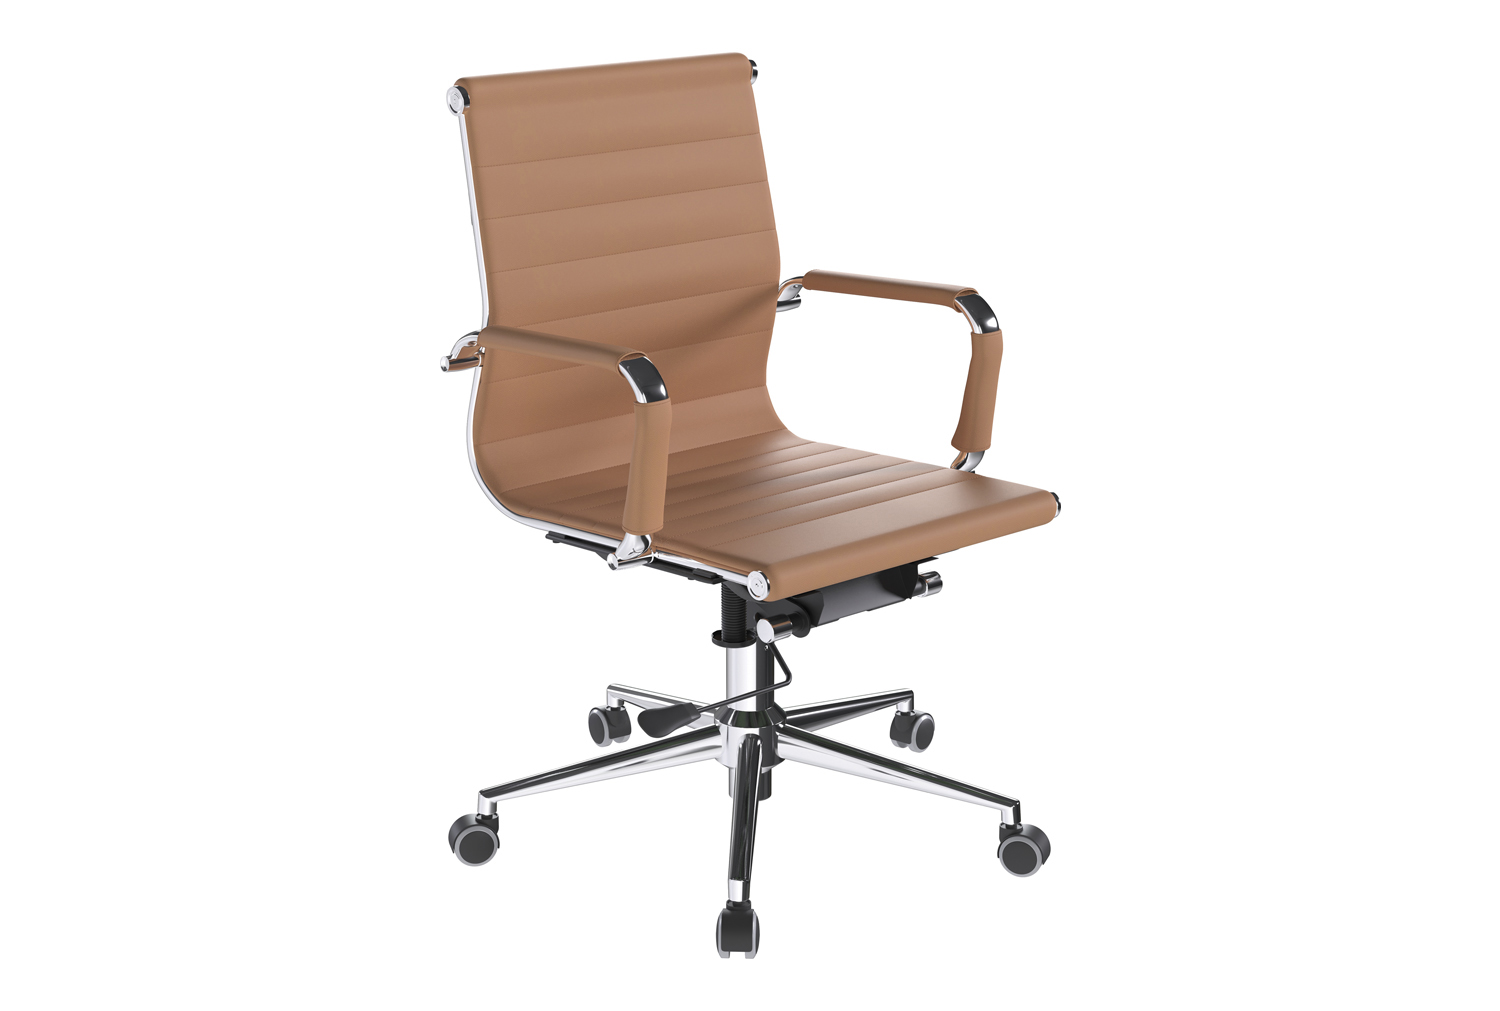 Andruzzi Medium Back Black Bonded Leather Executive Office Chair, Brown, Express Delivery